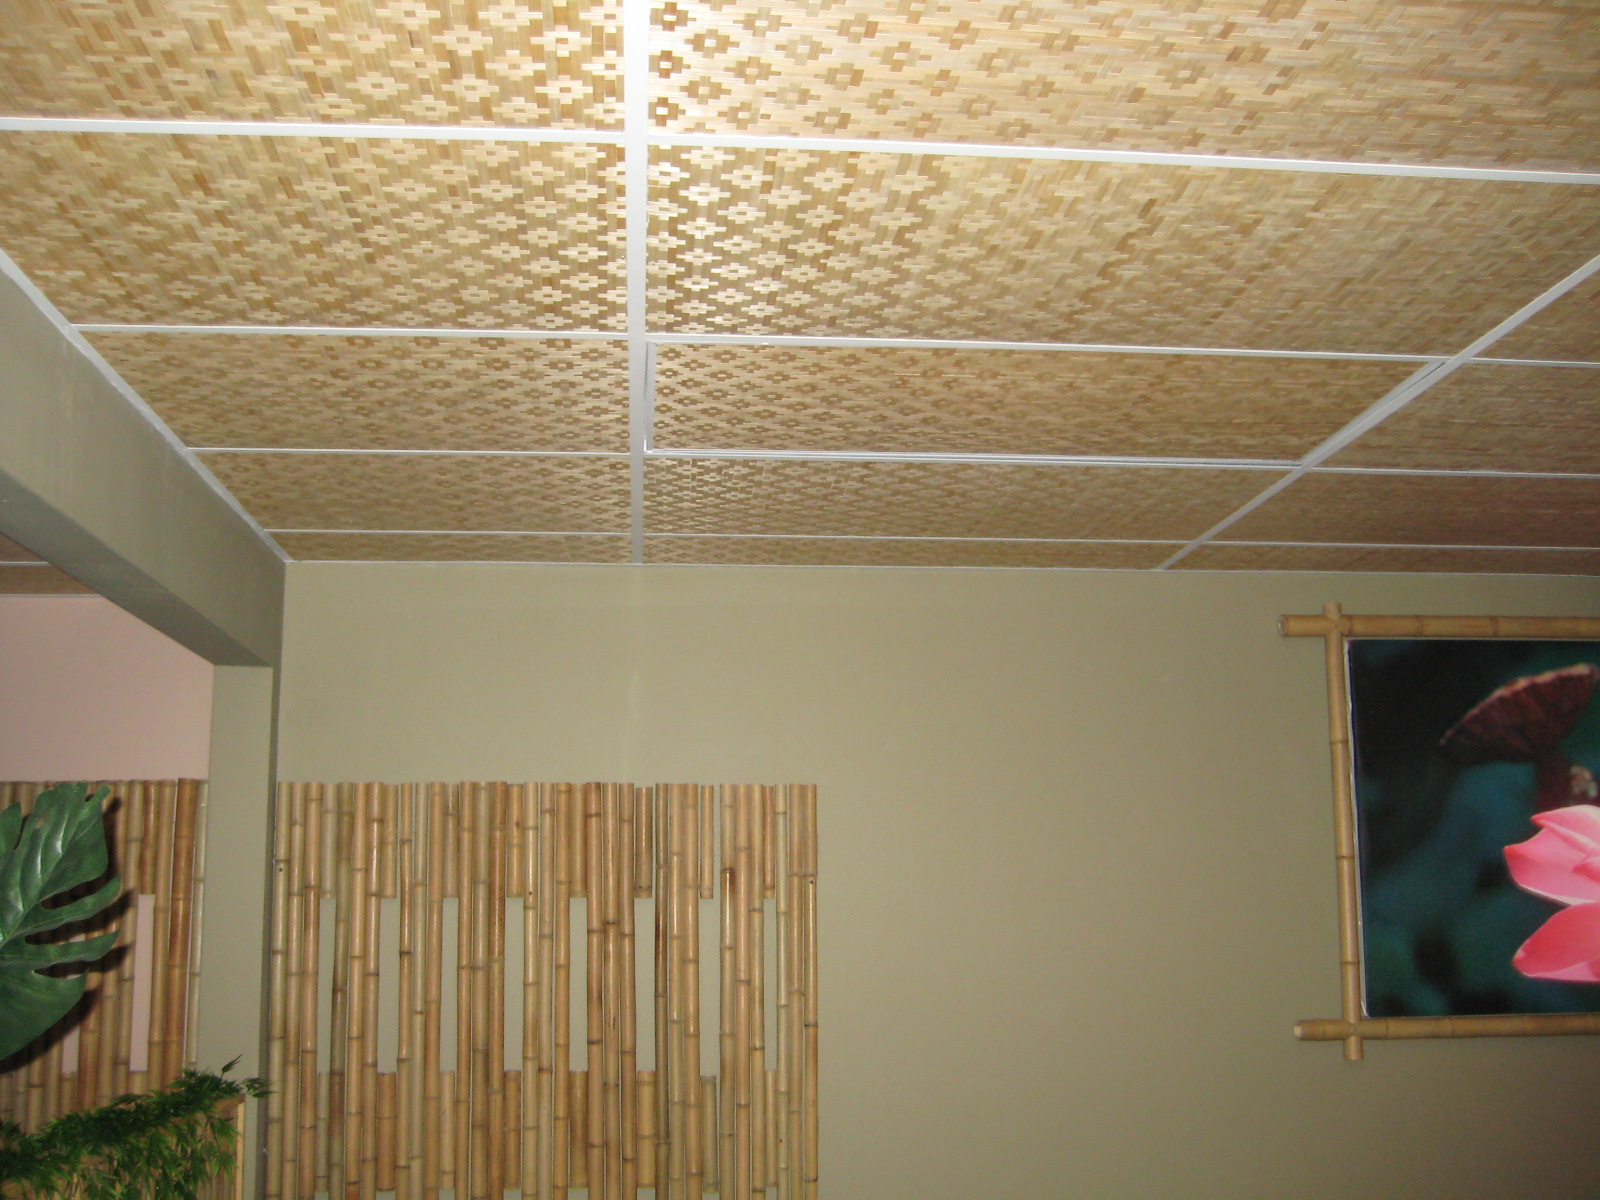 Home Design With Unique Home Design Interior Decorated With Bamboo Wall Panels Design In Traditional Tropical Decoration Ideas Decoration Attractive Bamboo Wall Panels As Eco Friendly Decoration